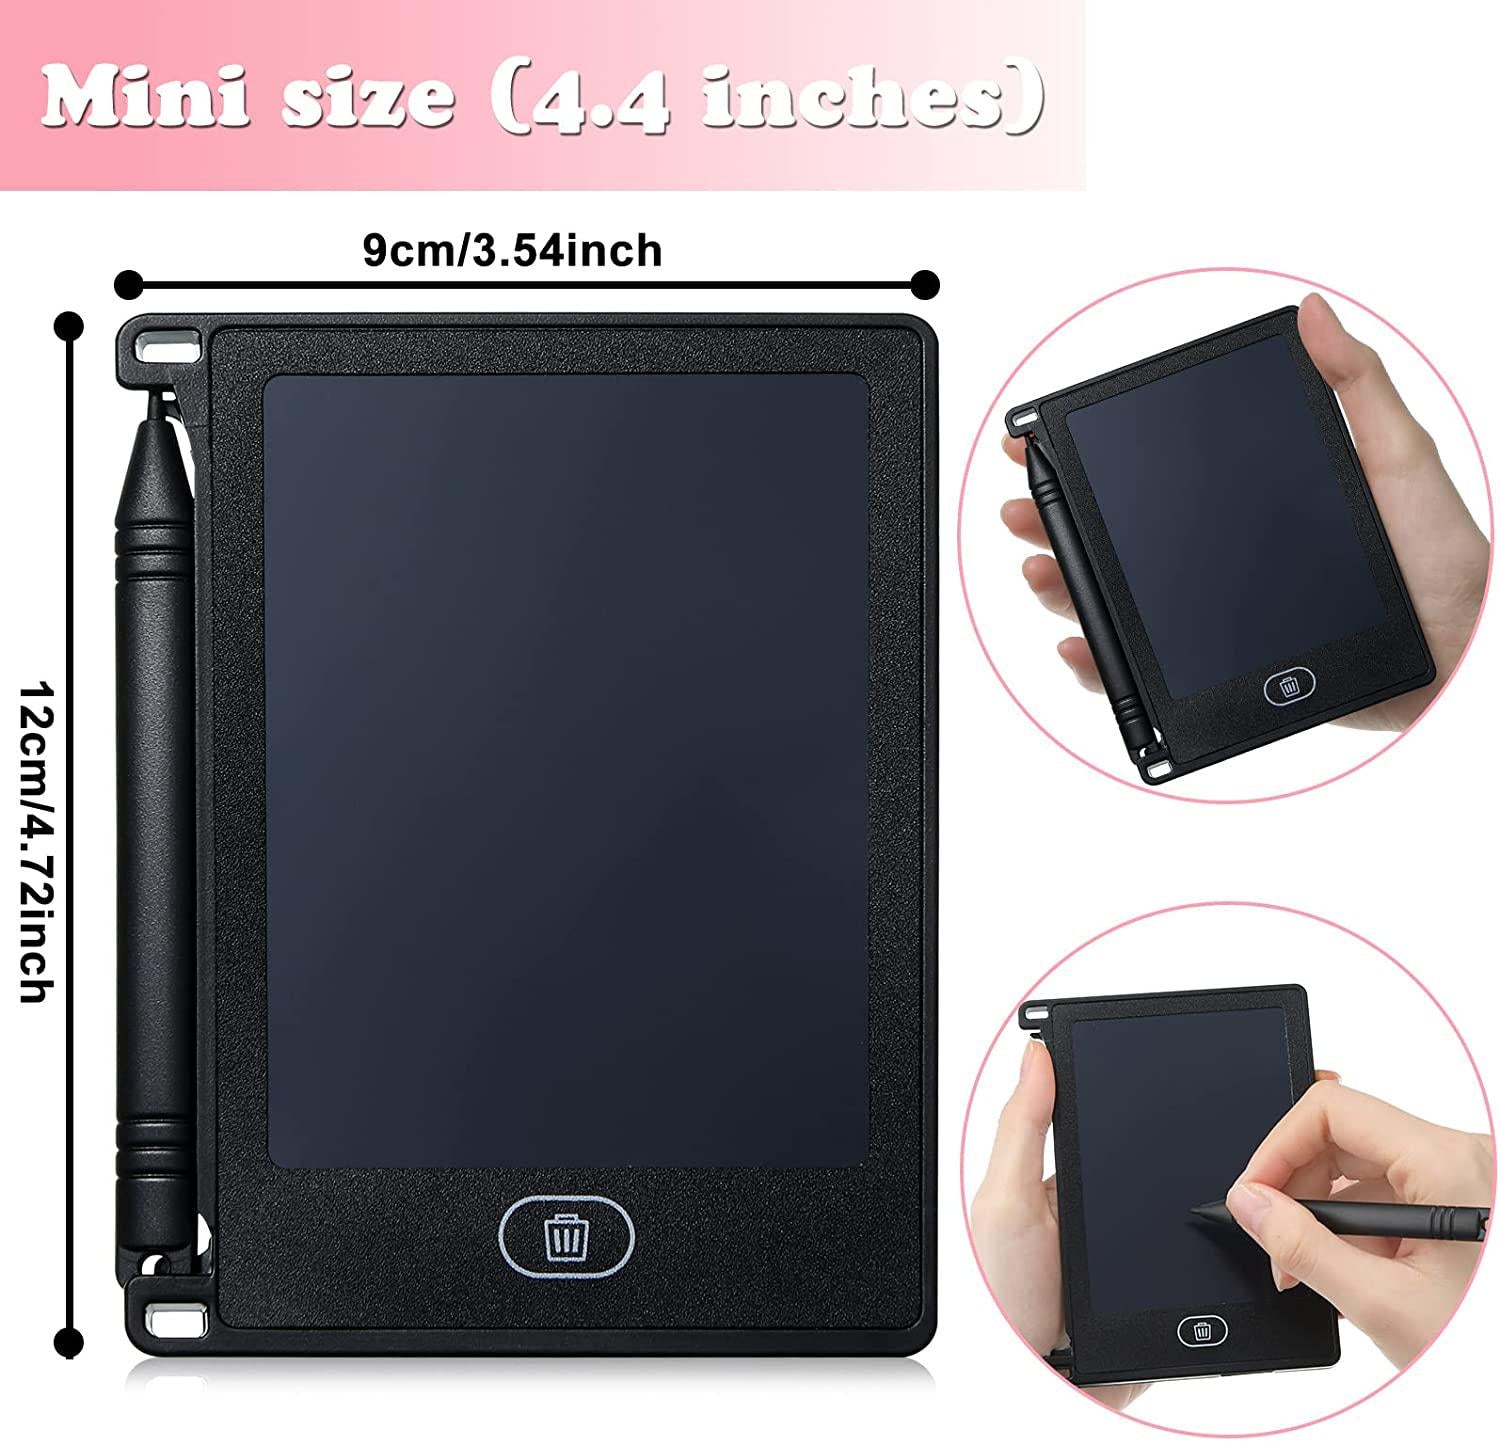 Gersoniel, LCD Writing Tablet Mini Electronic Doodle Board Graphics Educational Toys Learning Writing Pad Drawing Pad Preschool Art Toys for Birthday Favor, 4.72 x 3.54 Inches (16)